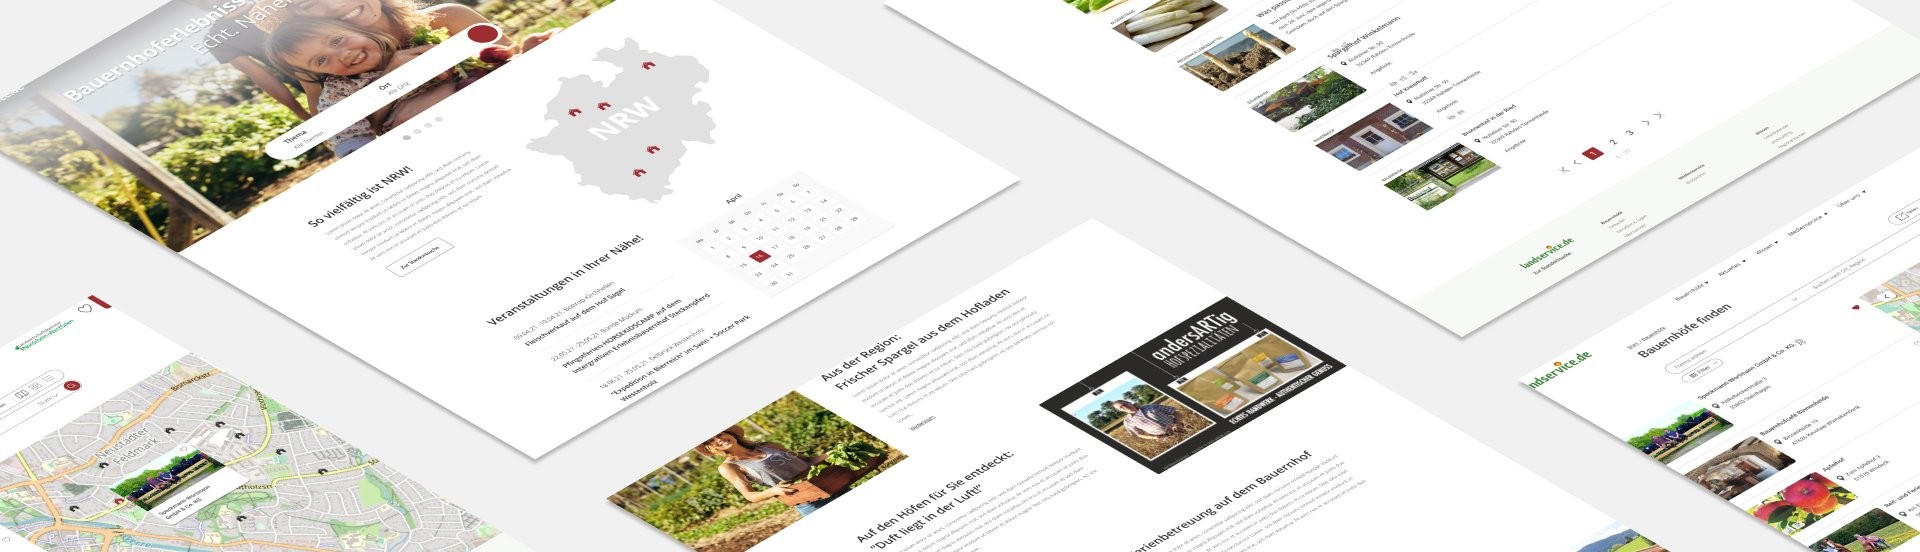 Fresh air for regional agriculture with modern UX and UI concepts